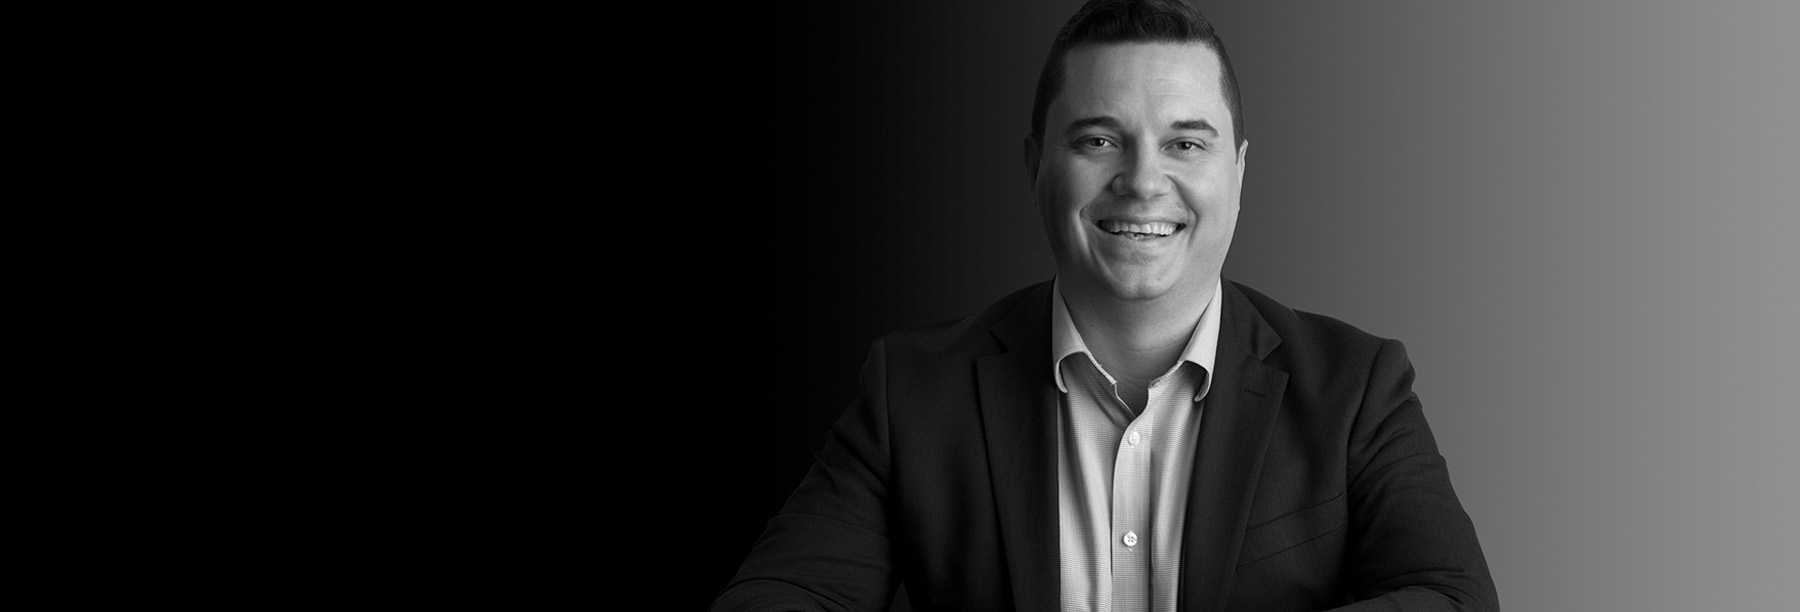 Michael-Kay-employment-law-adelaide